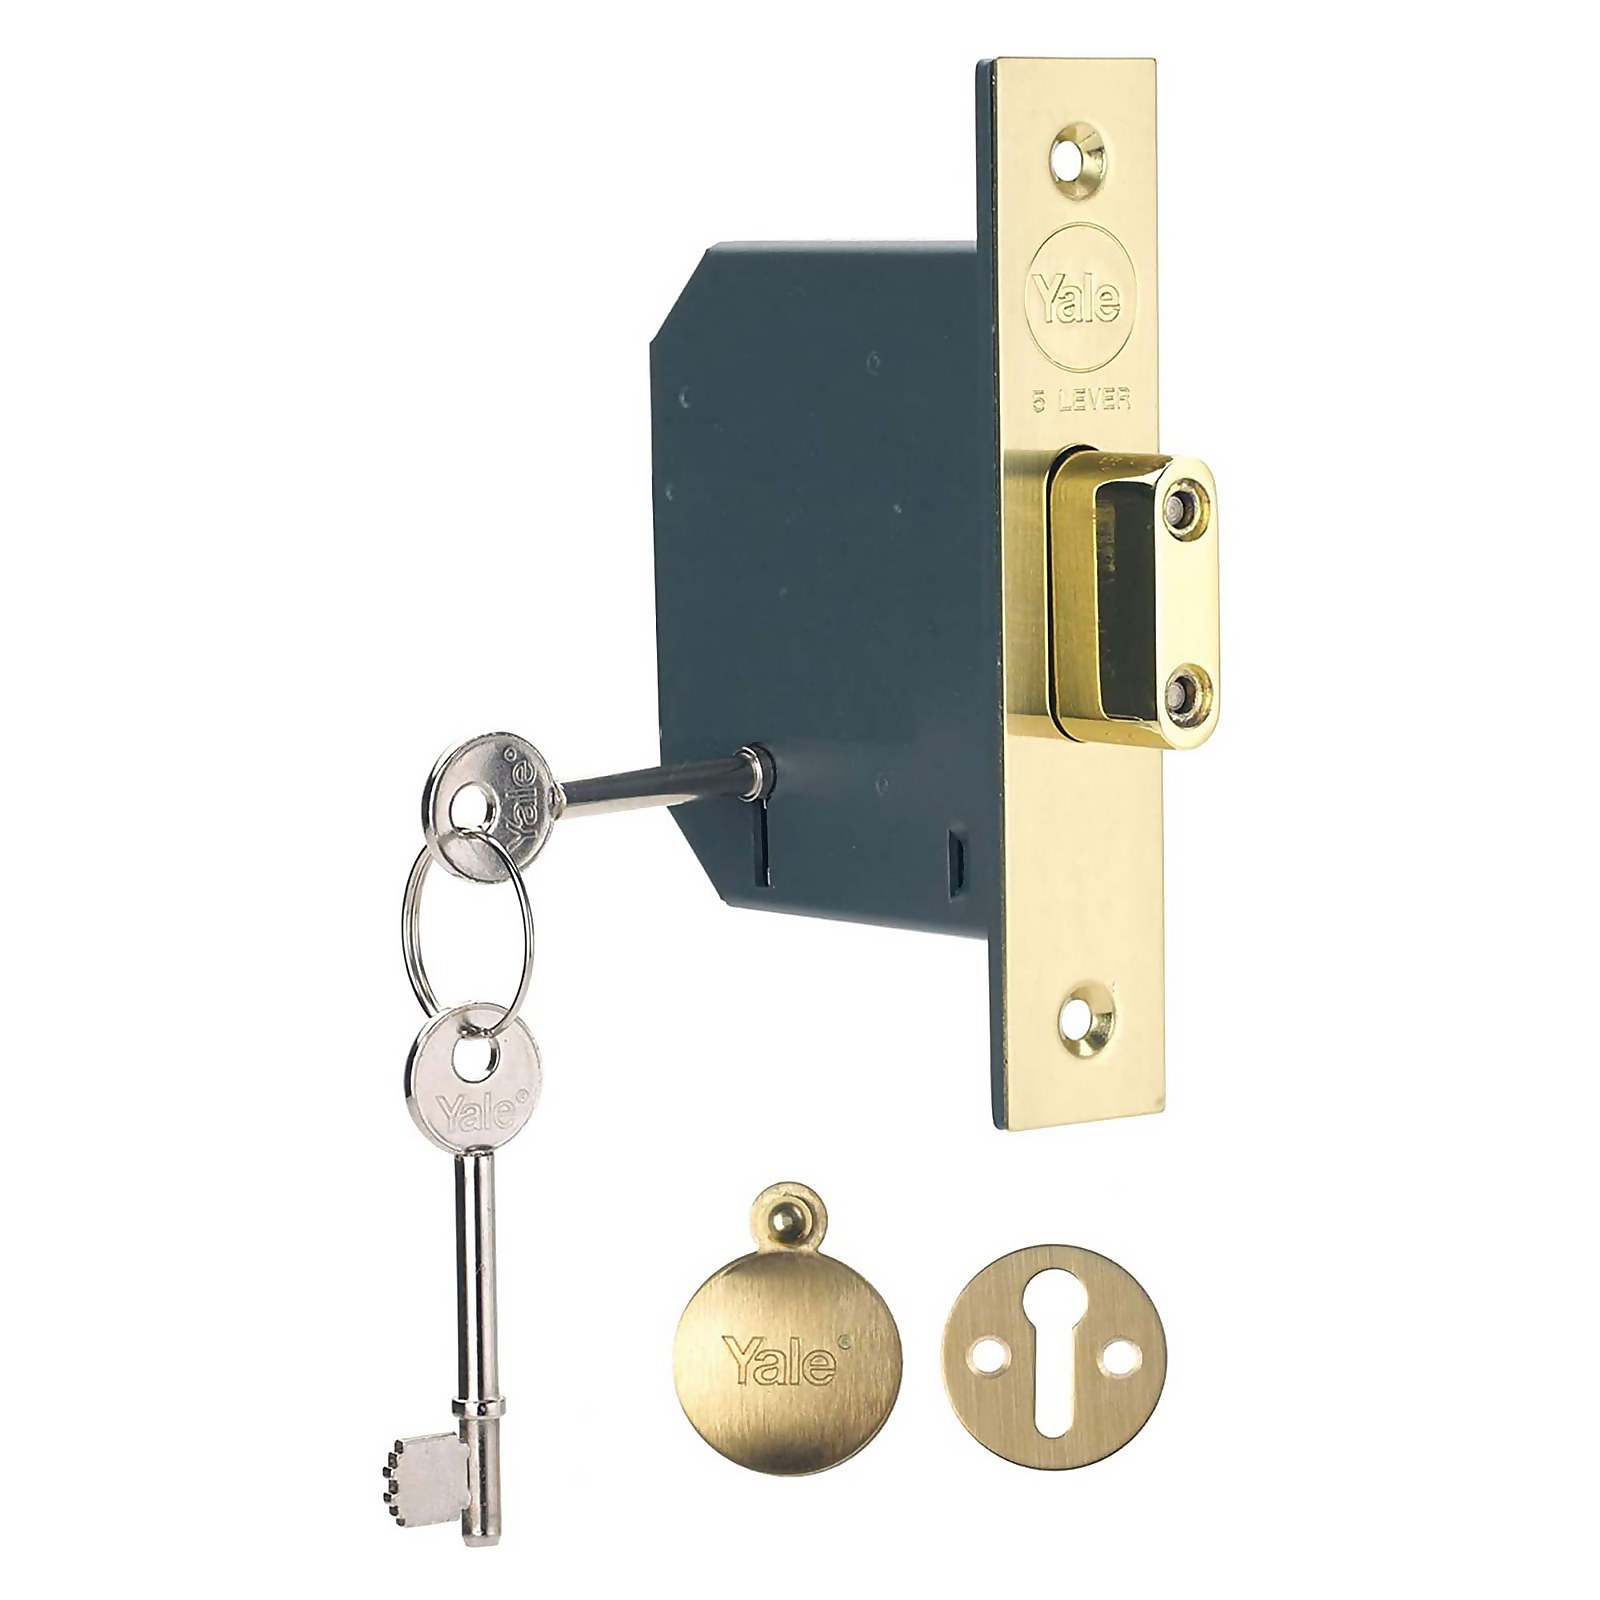 Photo of Yale Pm552 5 Lever Brass Mortice 3 Inch Deadlock